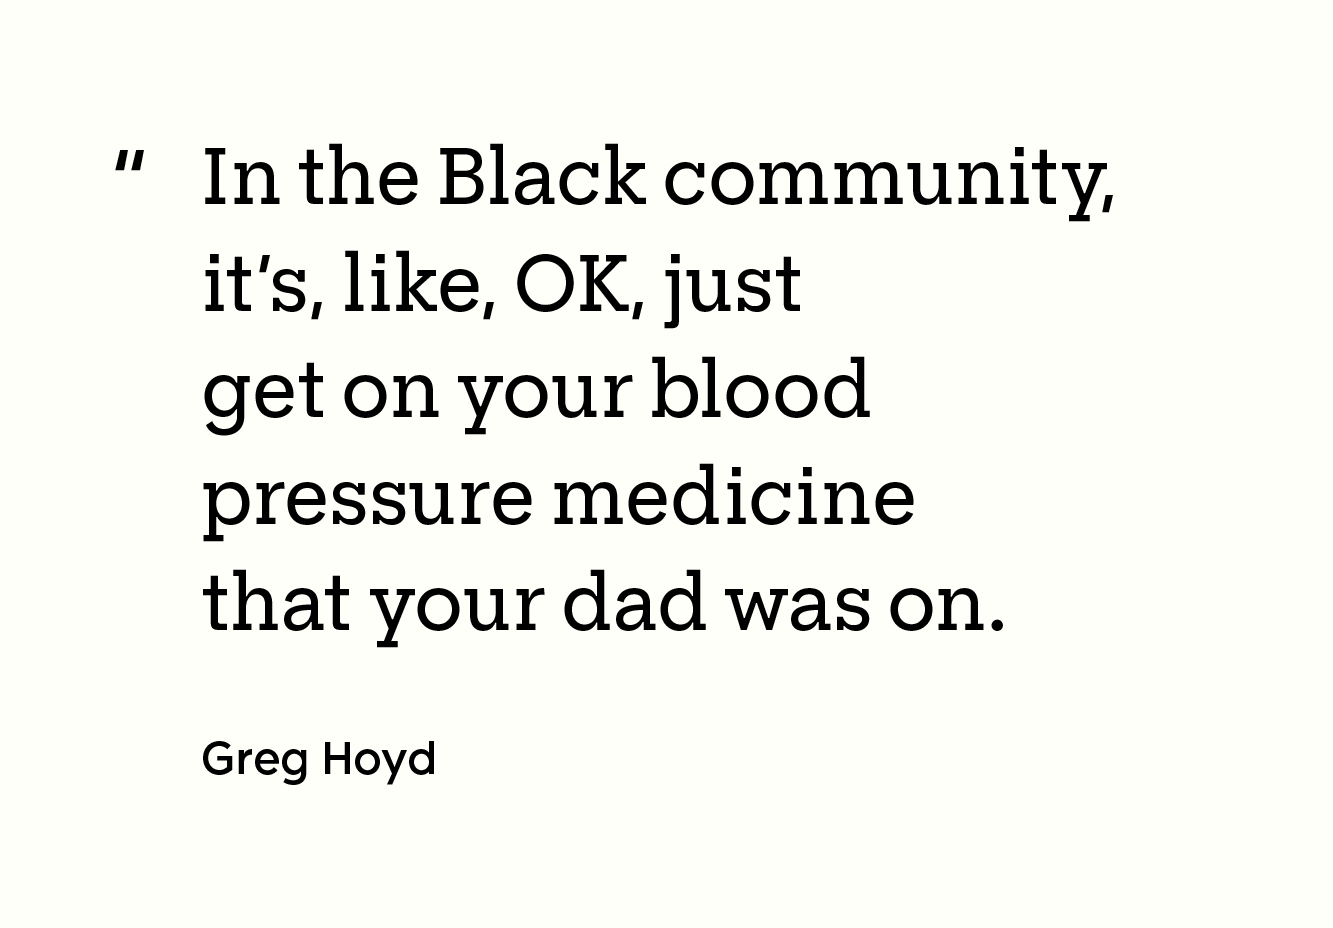 “In the Black community, it’s, like, OK, just get on your blood pressure medicine that your dad was on. - Greg Hoyd”